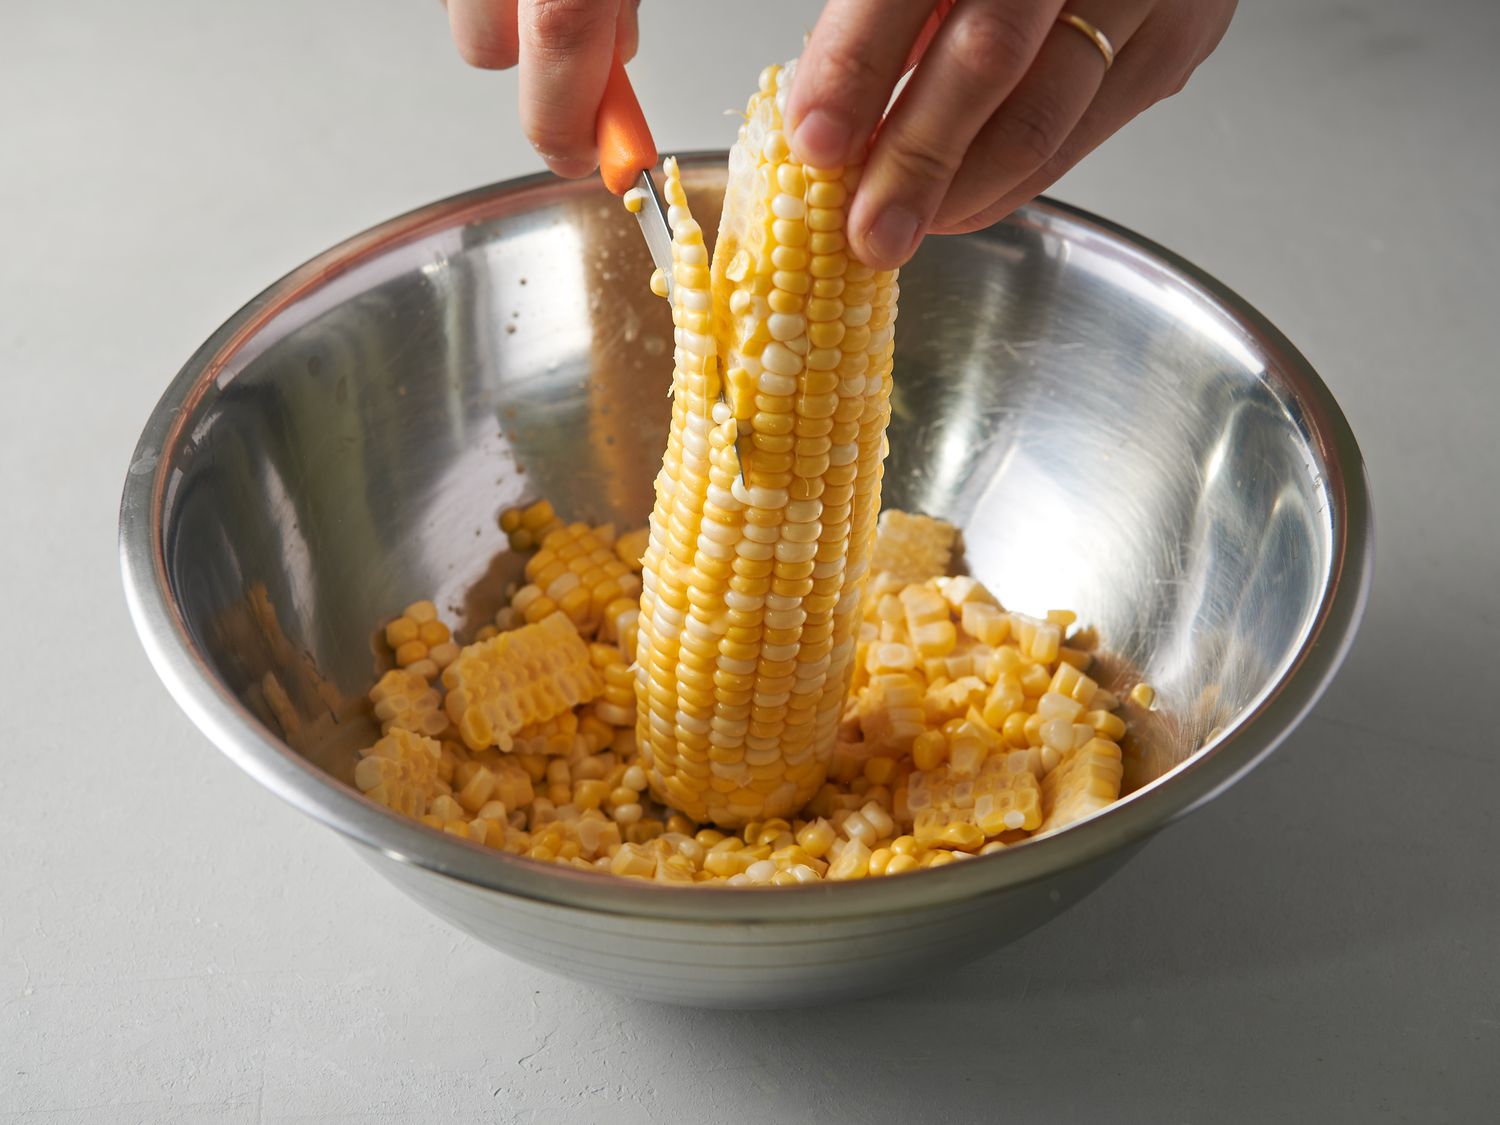 Holding corn cob upright in a large bowl and cutting off kernels with a sharp knife